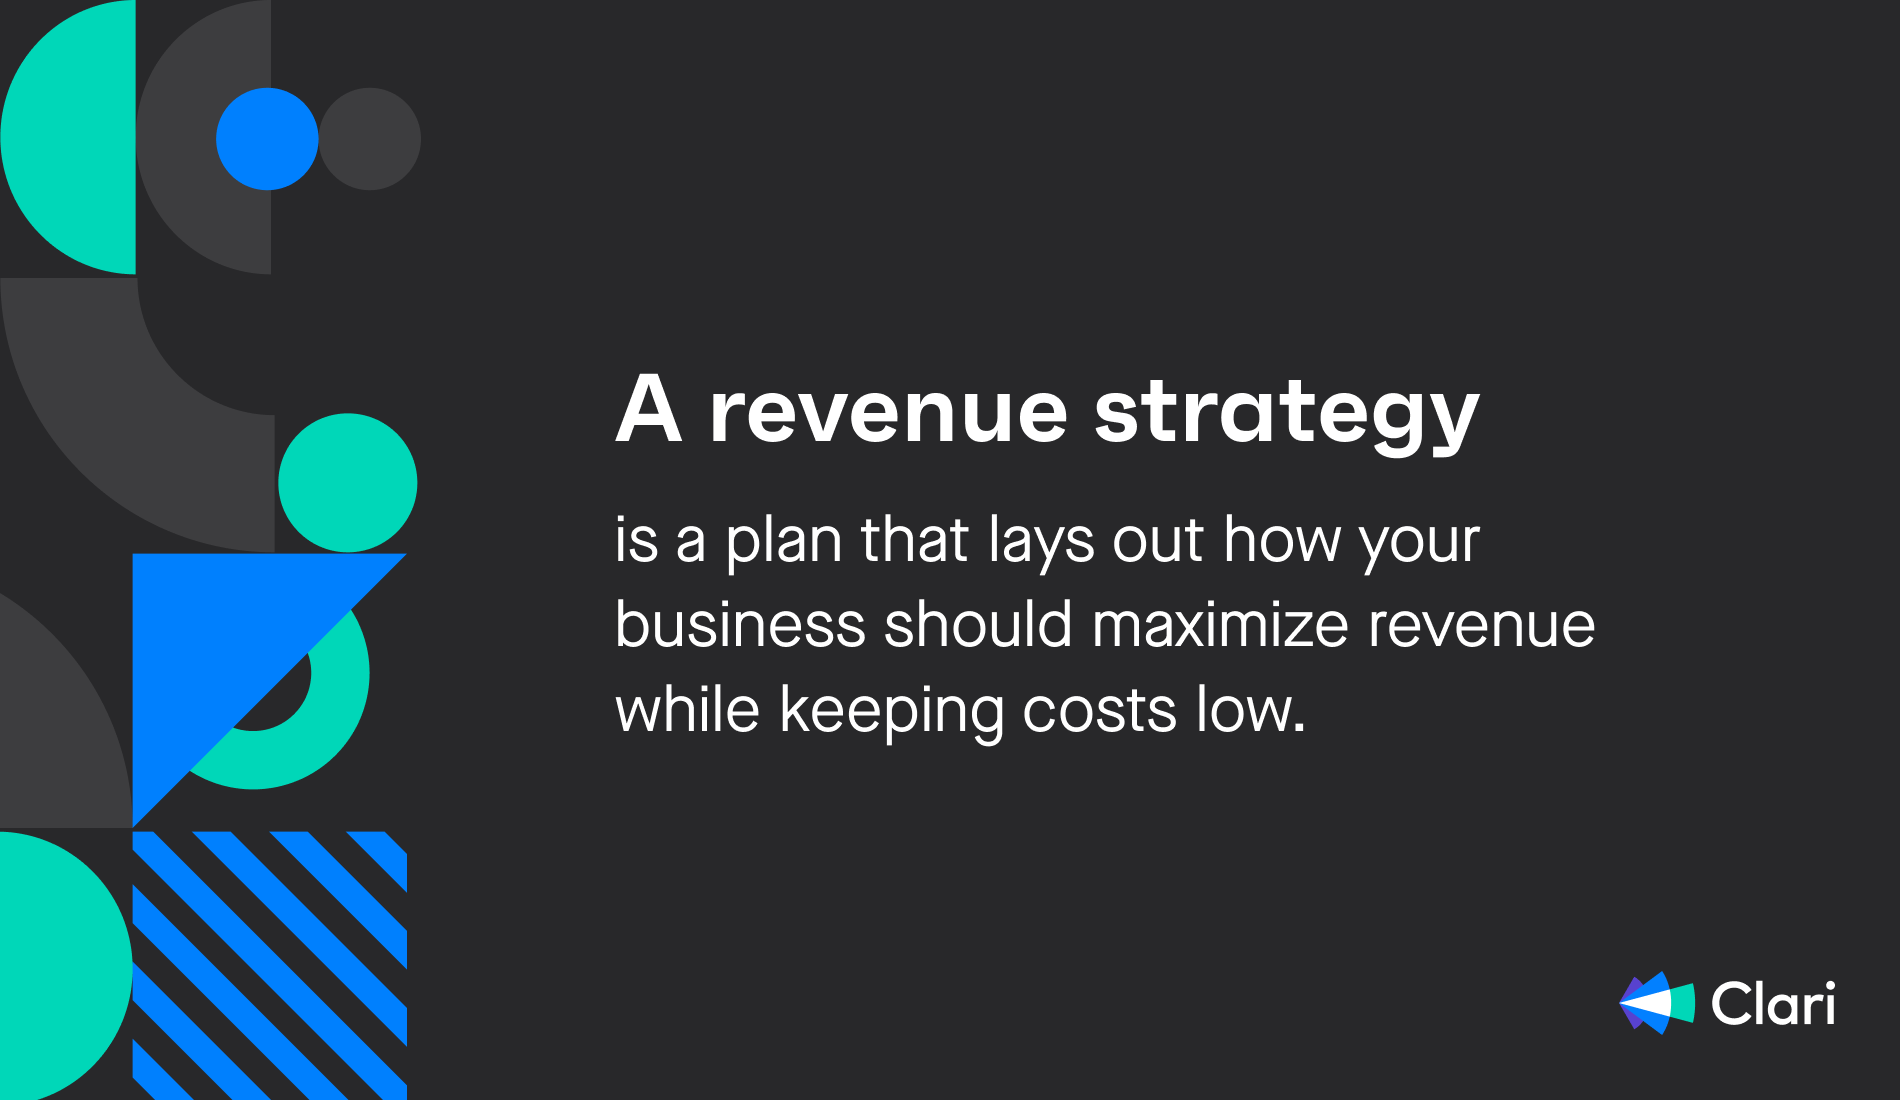 What is a revenue strategy?